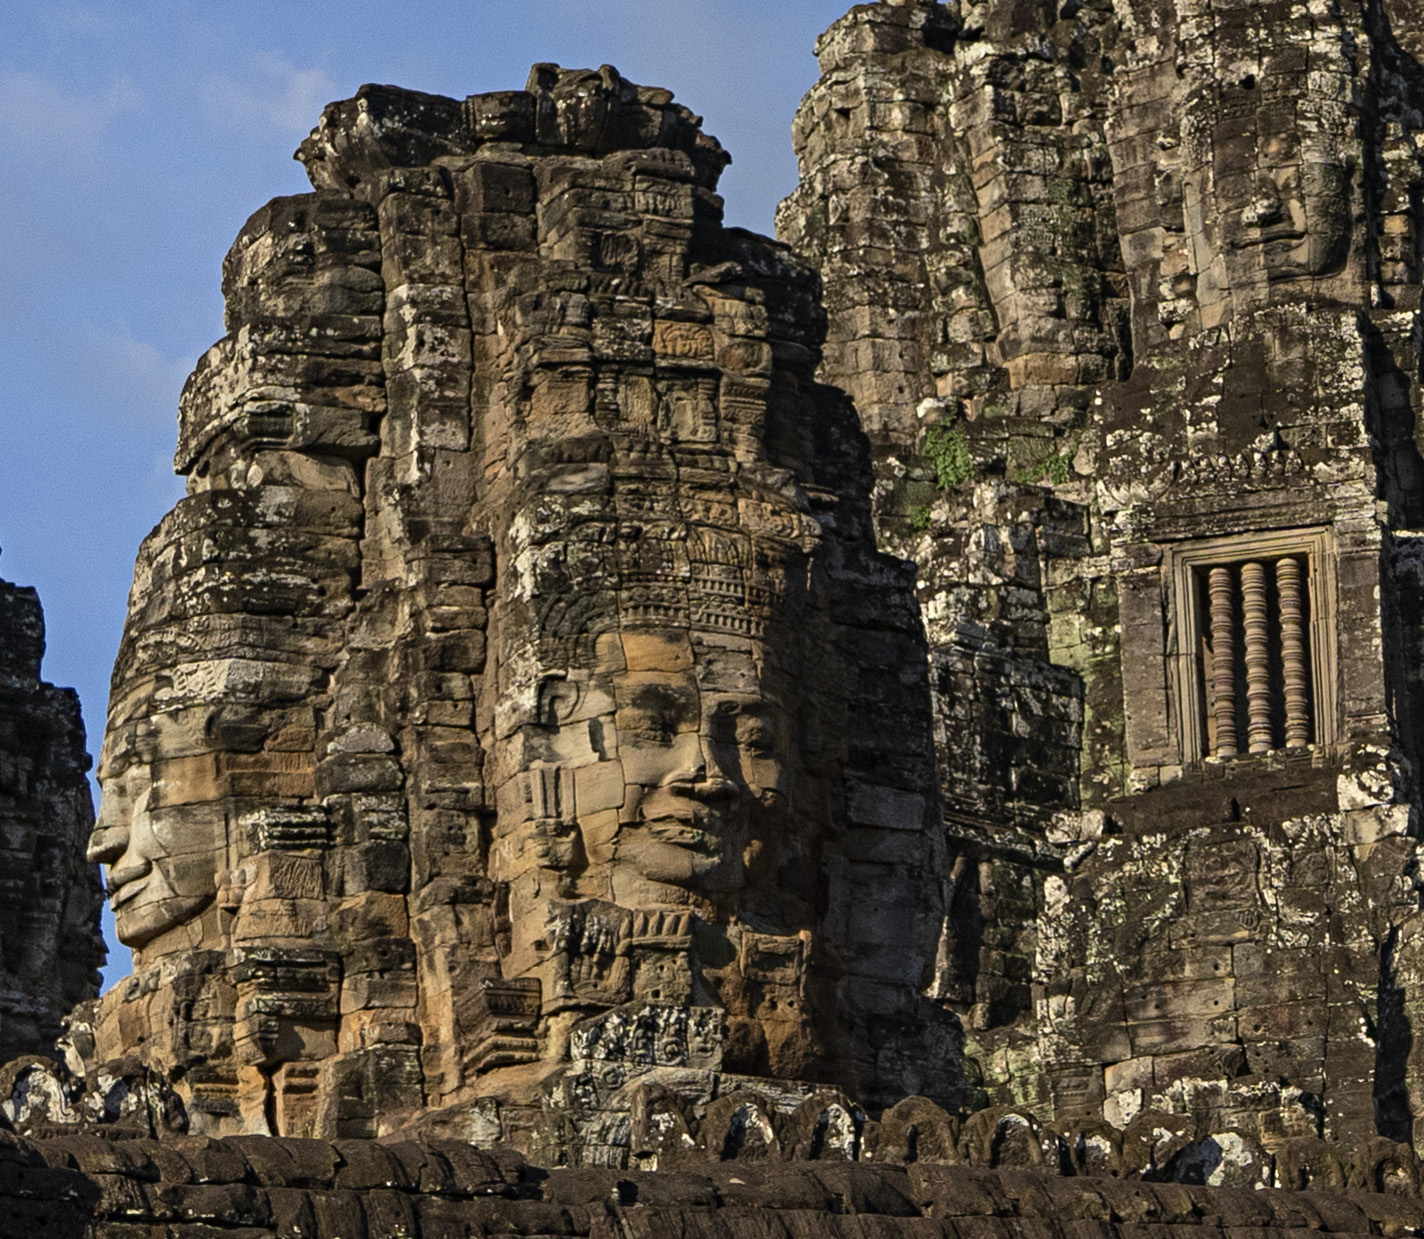 Bayon, another tower